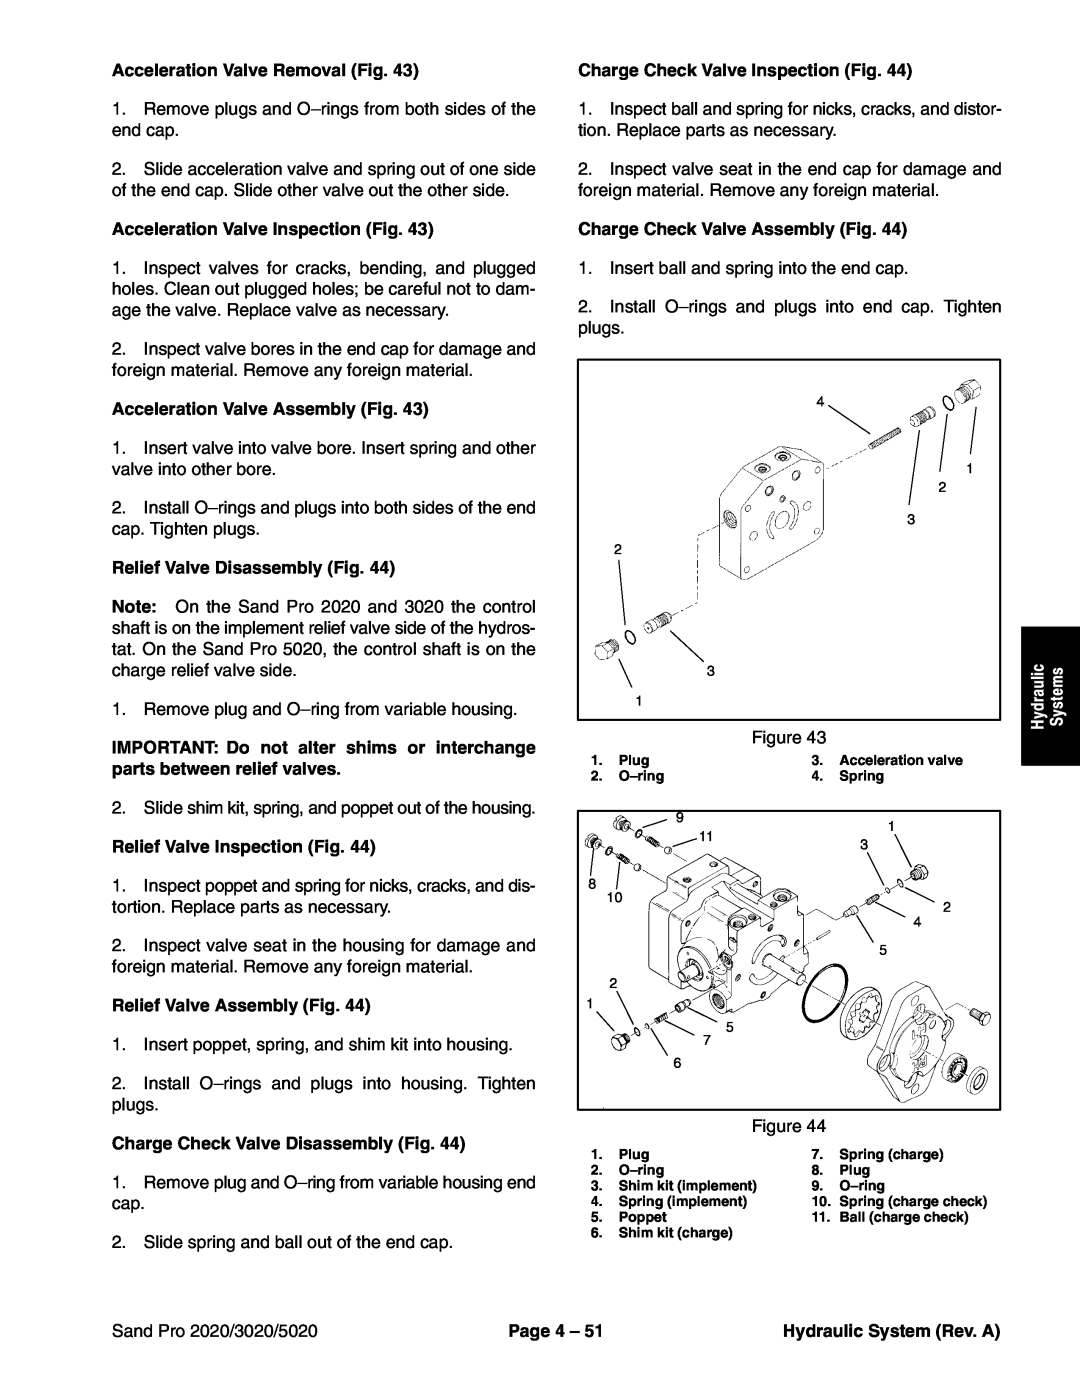 Toro 3020, 5020 Acceleration Valve Removal Fig, Acceleration Valve Inspection Fig, Acceleration Valve Assembly Fig, Page 4 